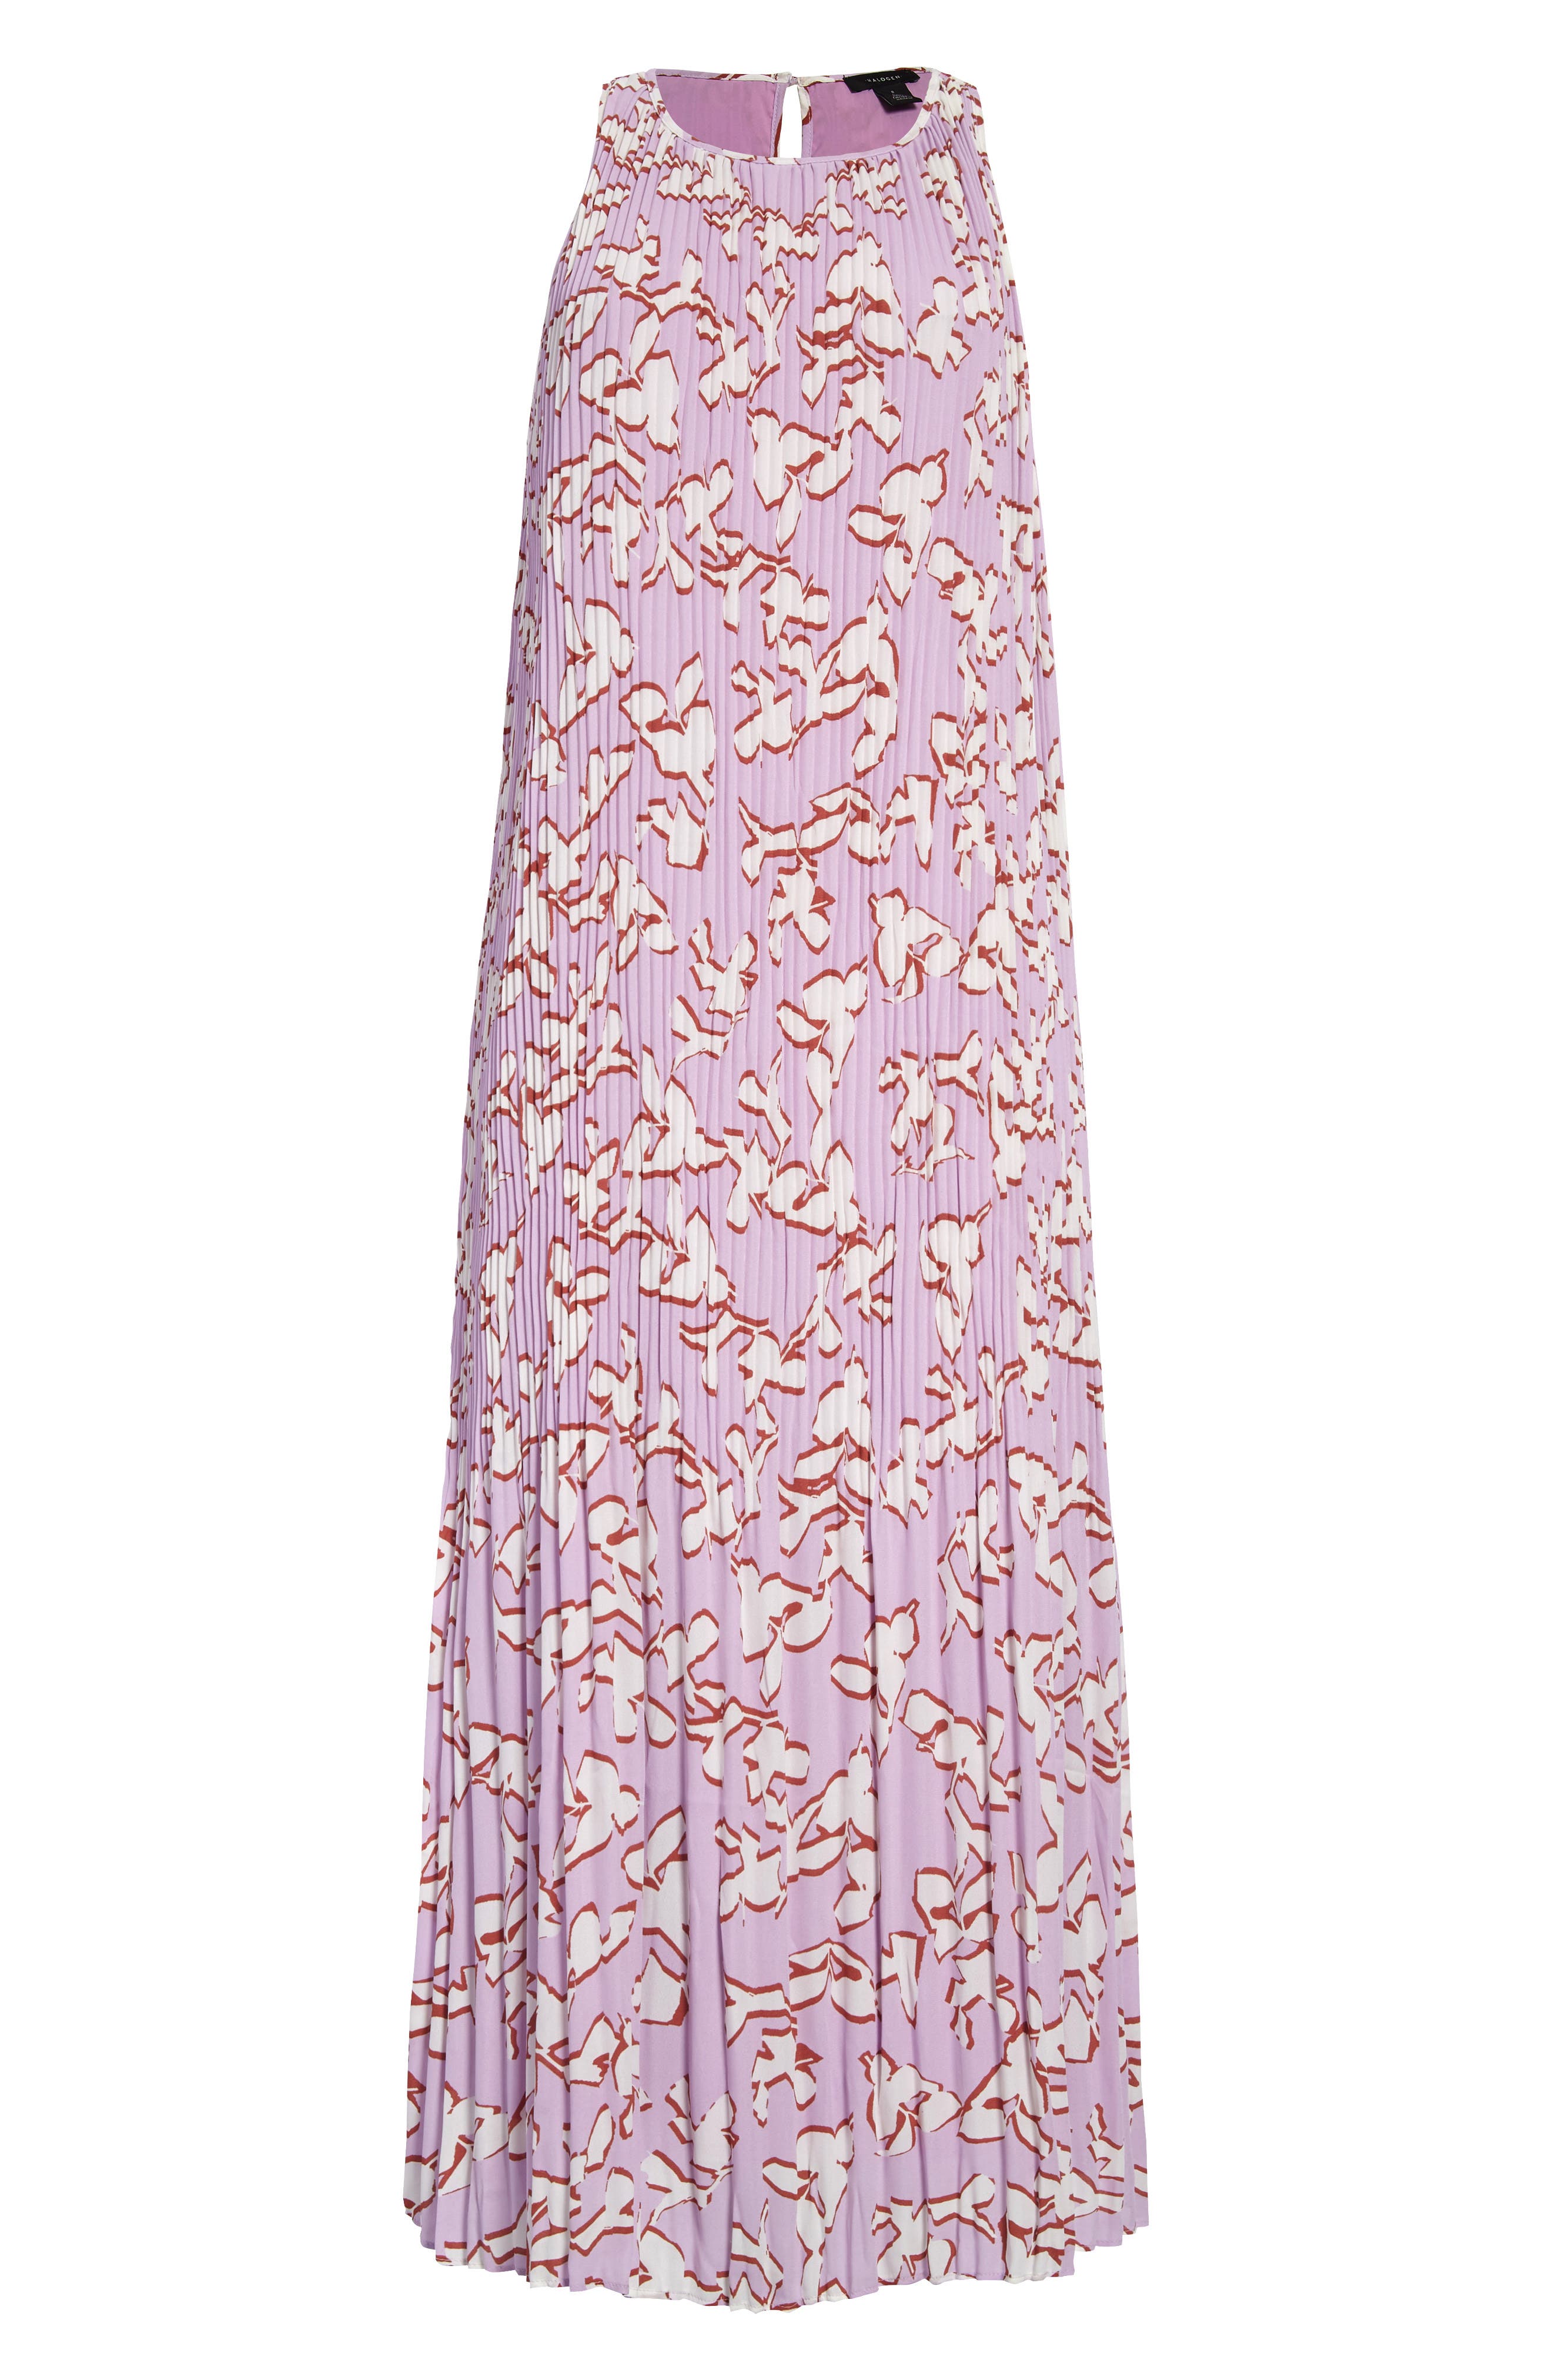 lilac floral print high frill neckline pleated dress